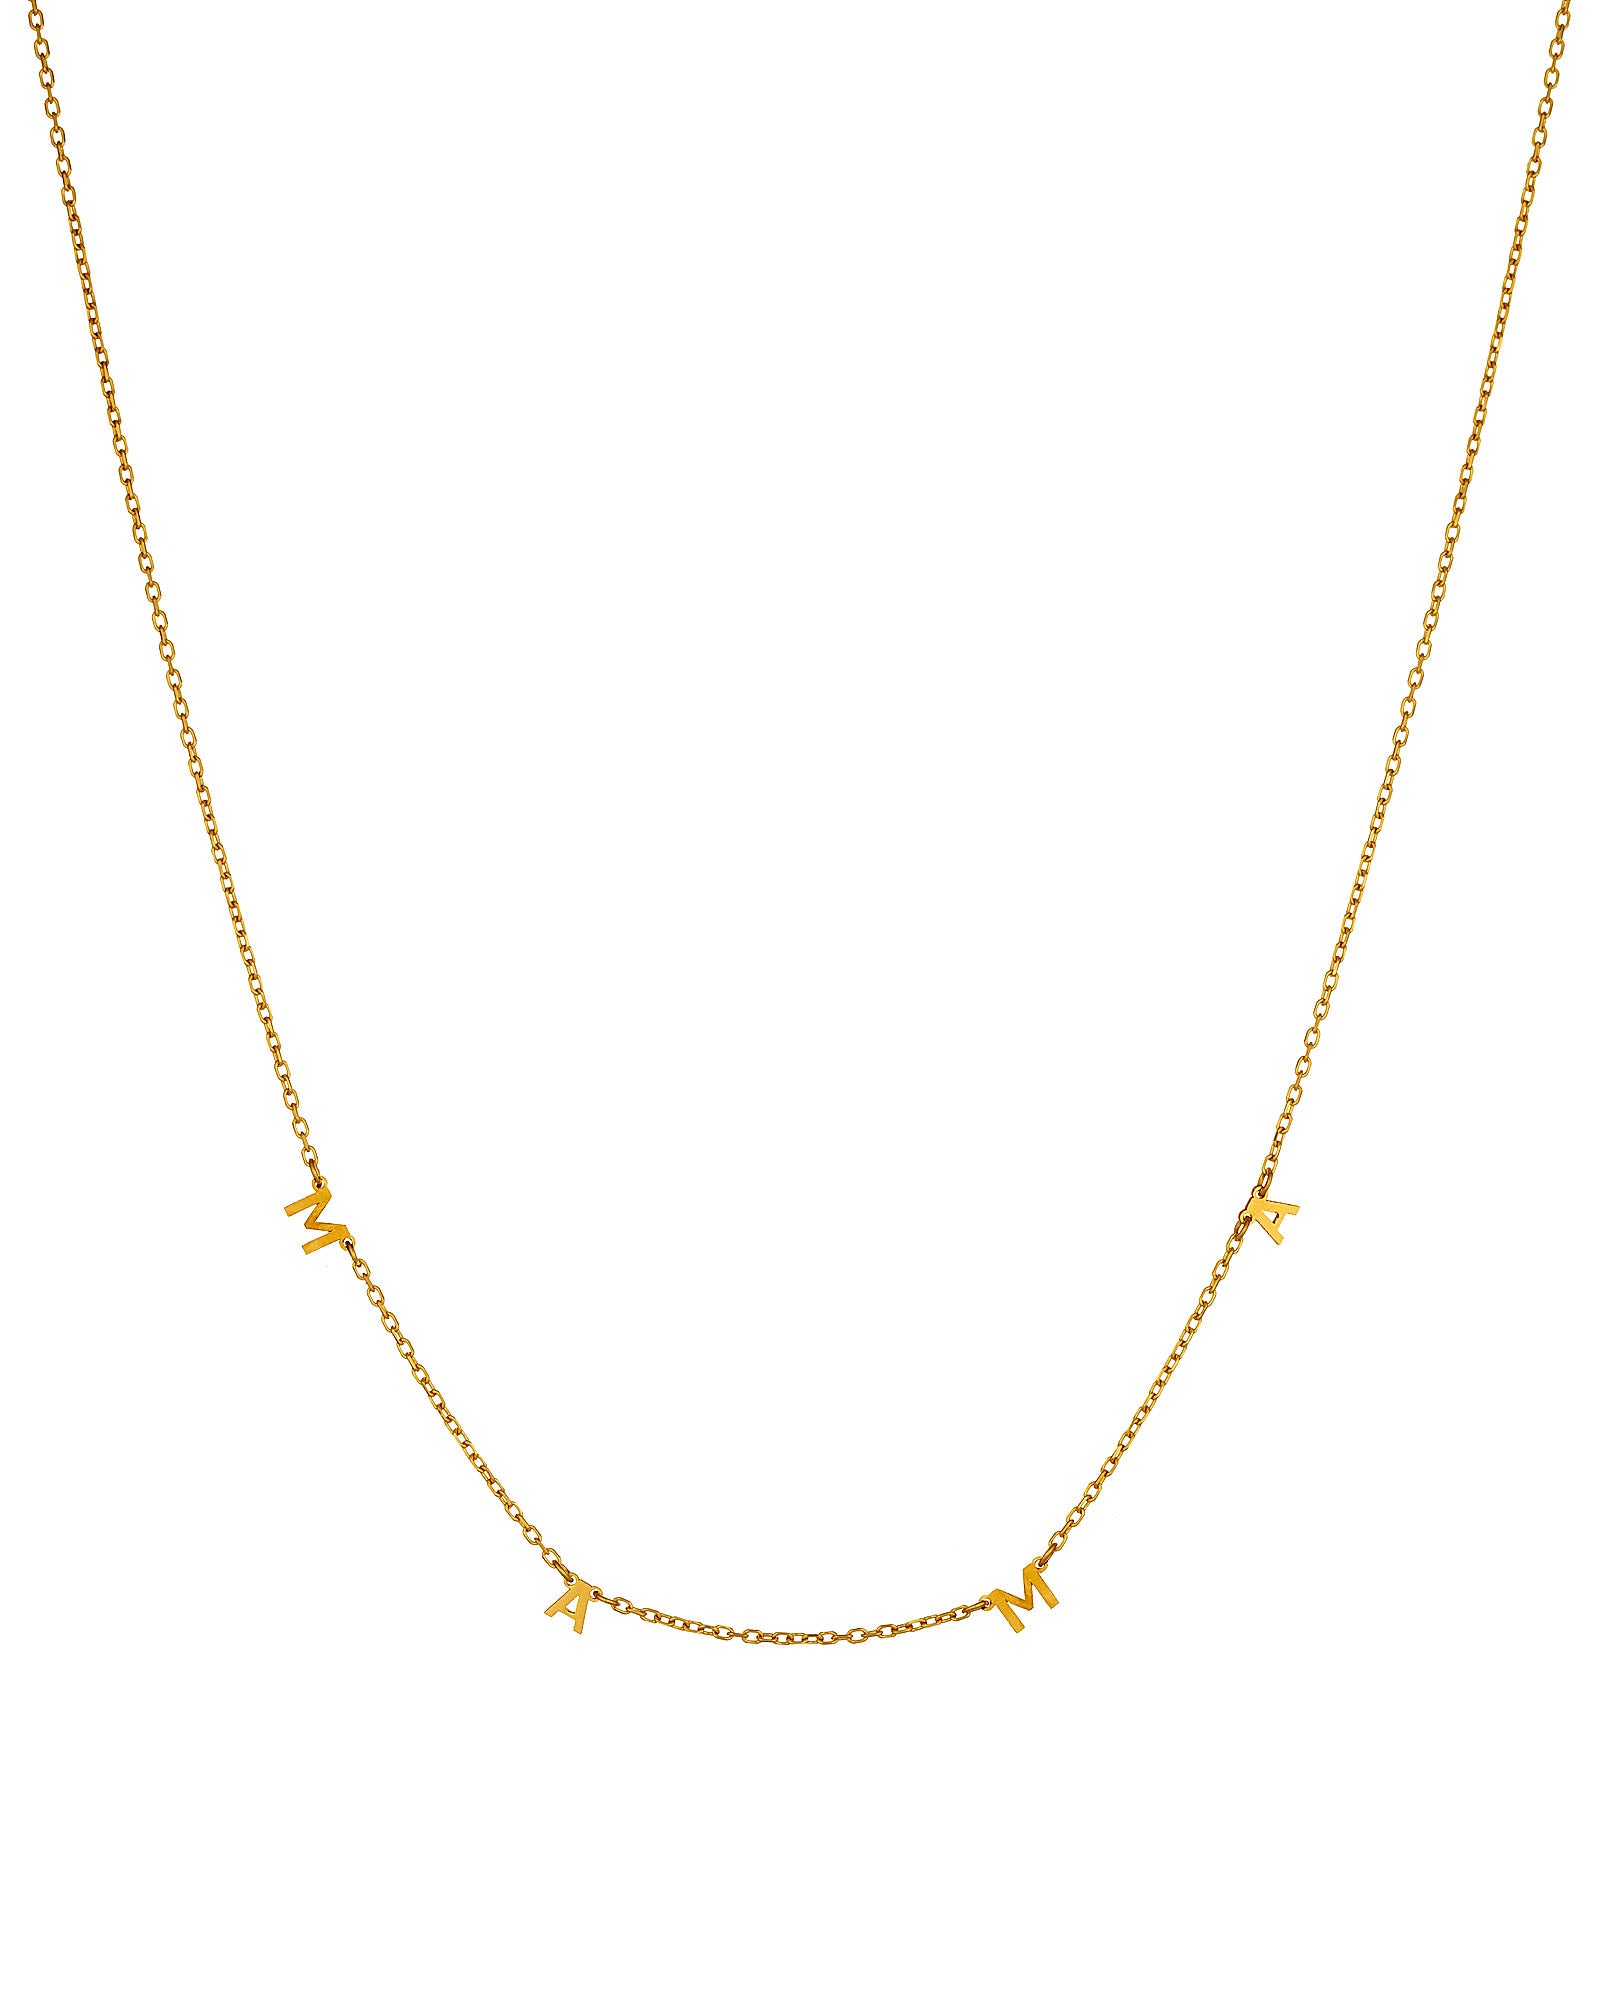 Special Offer! Gold Mini Mama Necklace